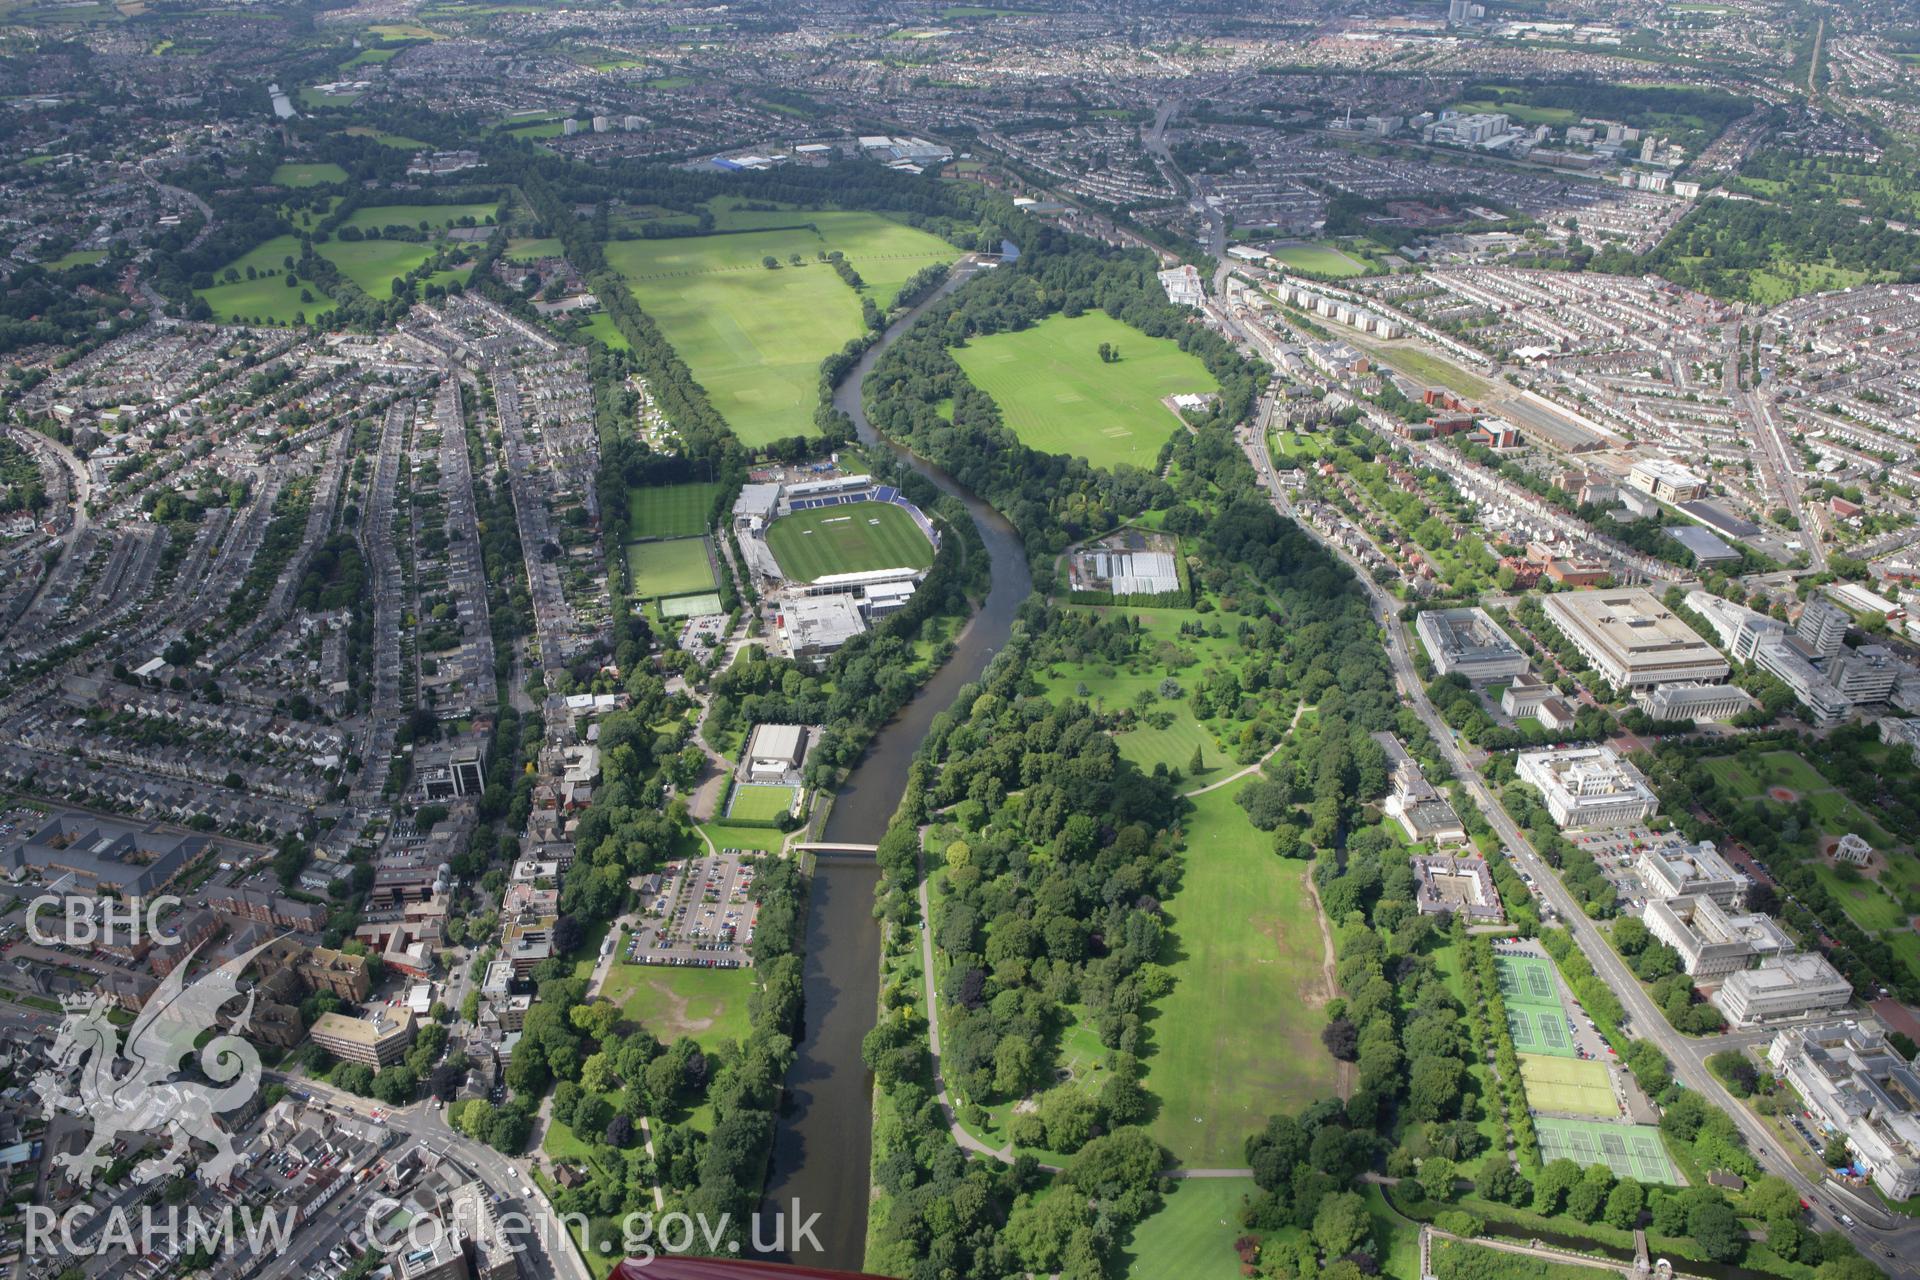 RCAHMW colour oblique aerial photograph of Cardiff Castle and Bute Park, Cardiff. Taken on 30 July 2007 by Toby Driver